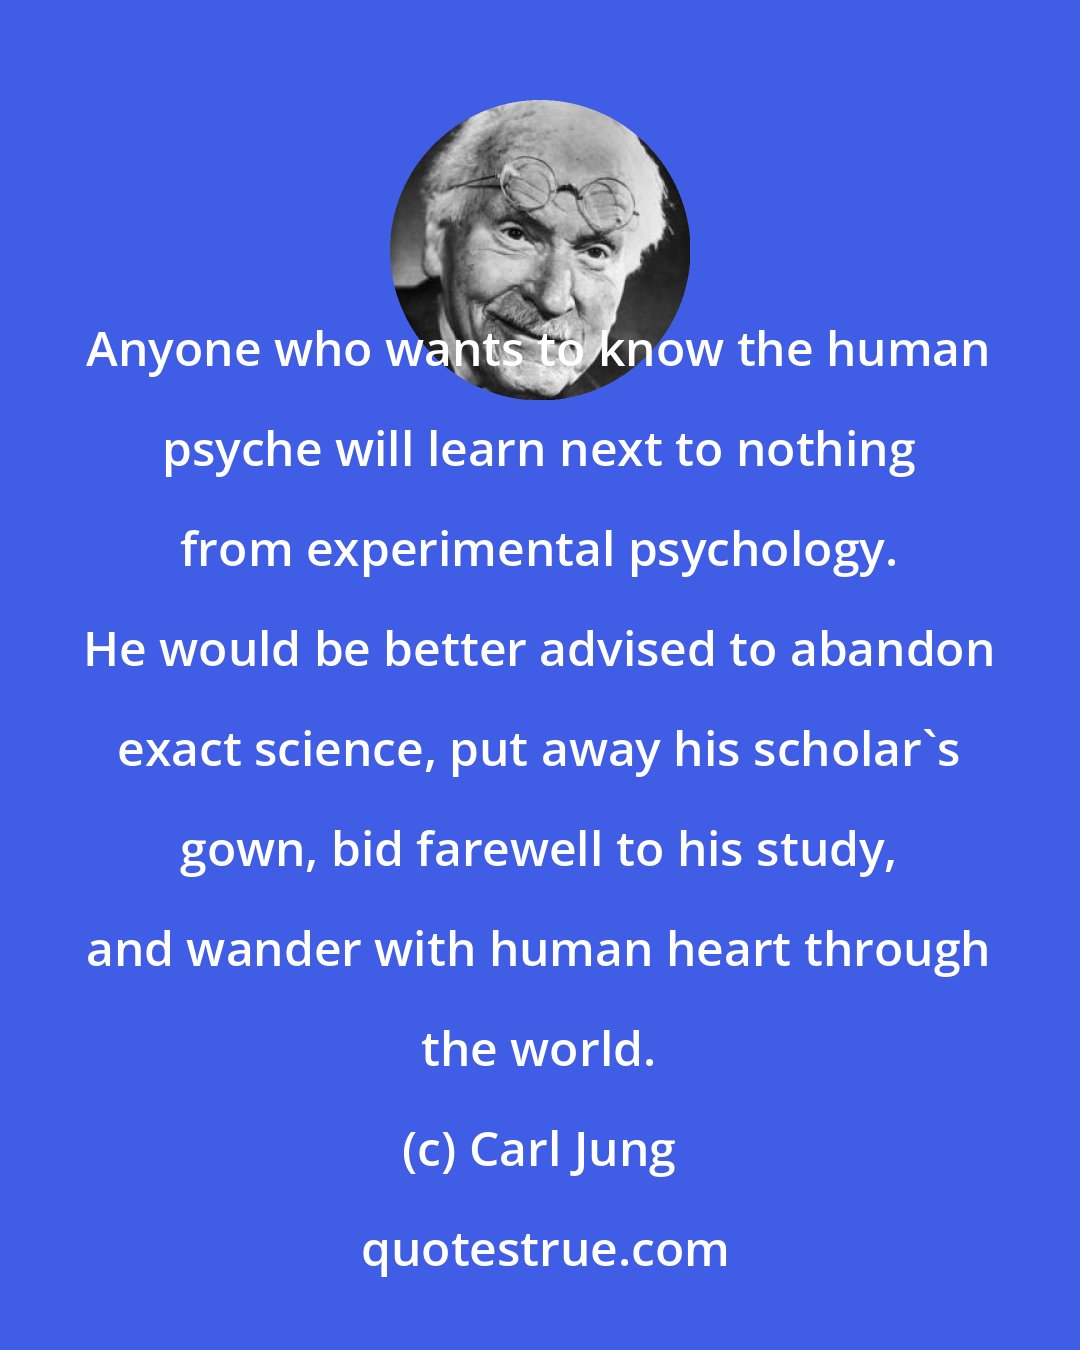 Carl Jung: Anyone who wants to know the human psyche will learn next to nothing from experimental psychology. He would be better advised to abandon exact science, put away his scholar's gown, bid farewell to his study, and wander with human heart through the world.